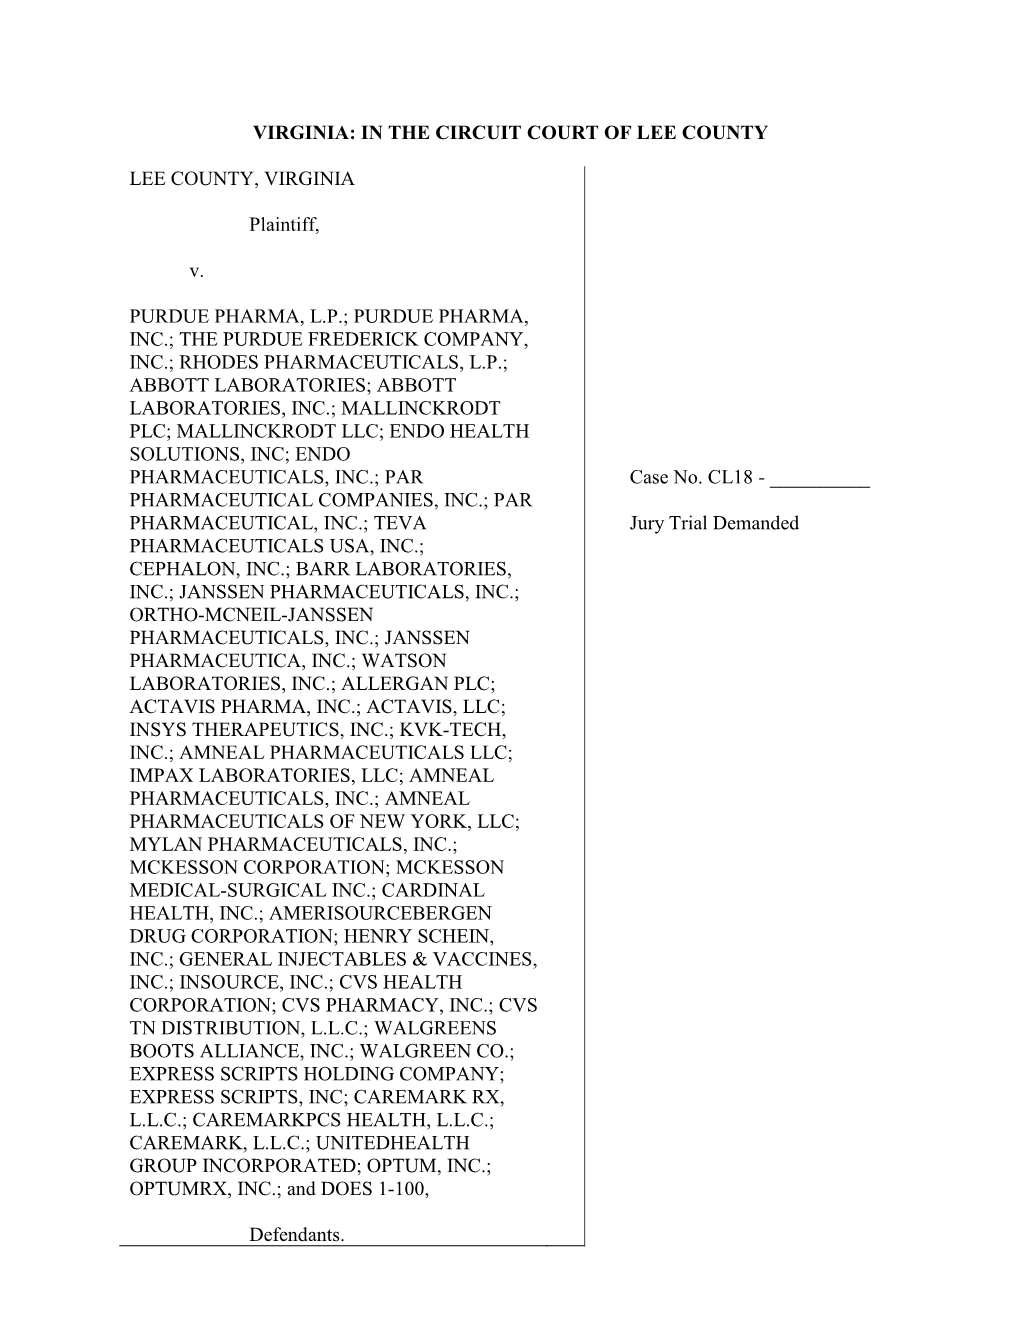 To Read the Lee County, VA Complaint